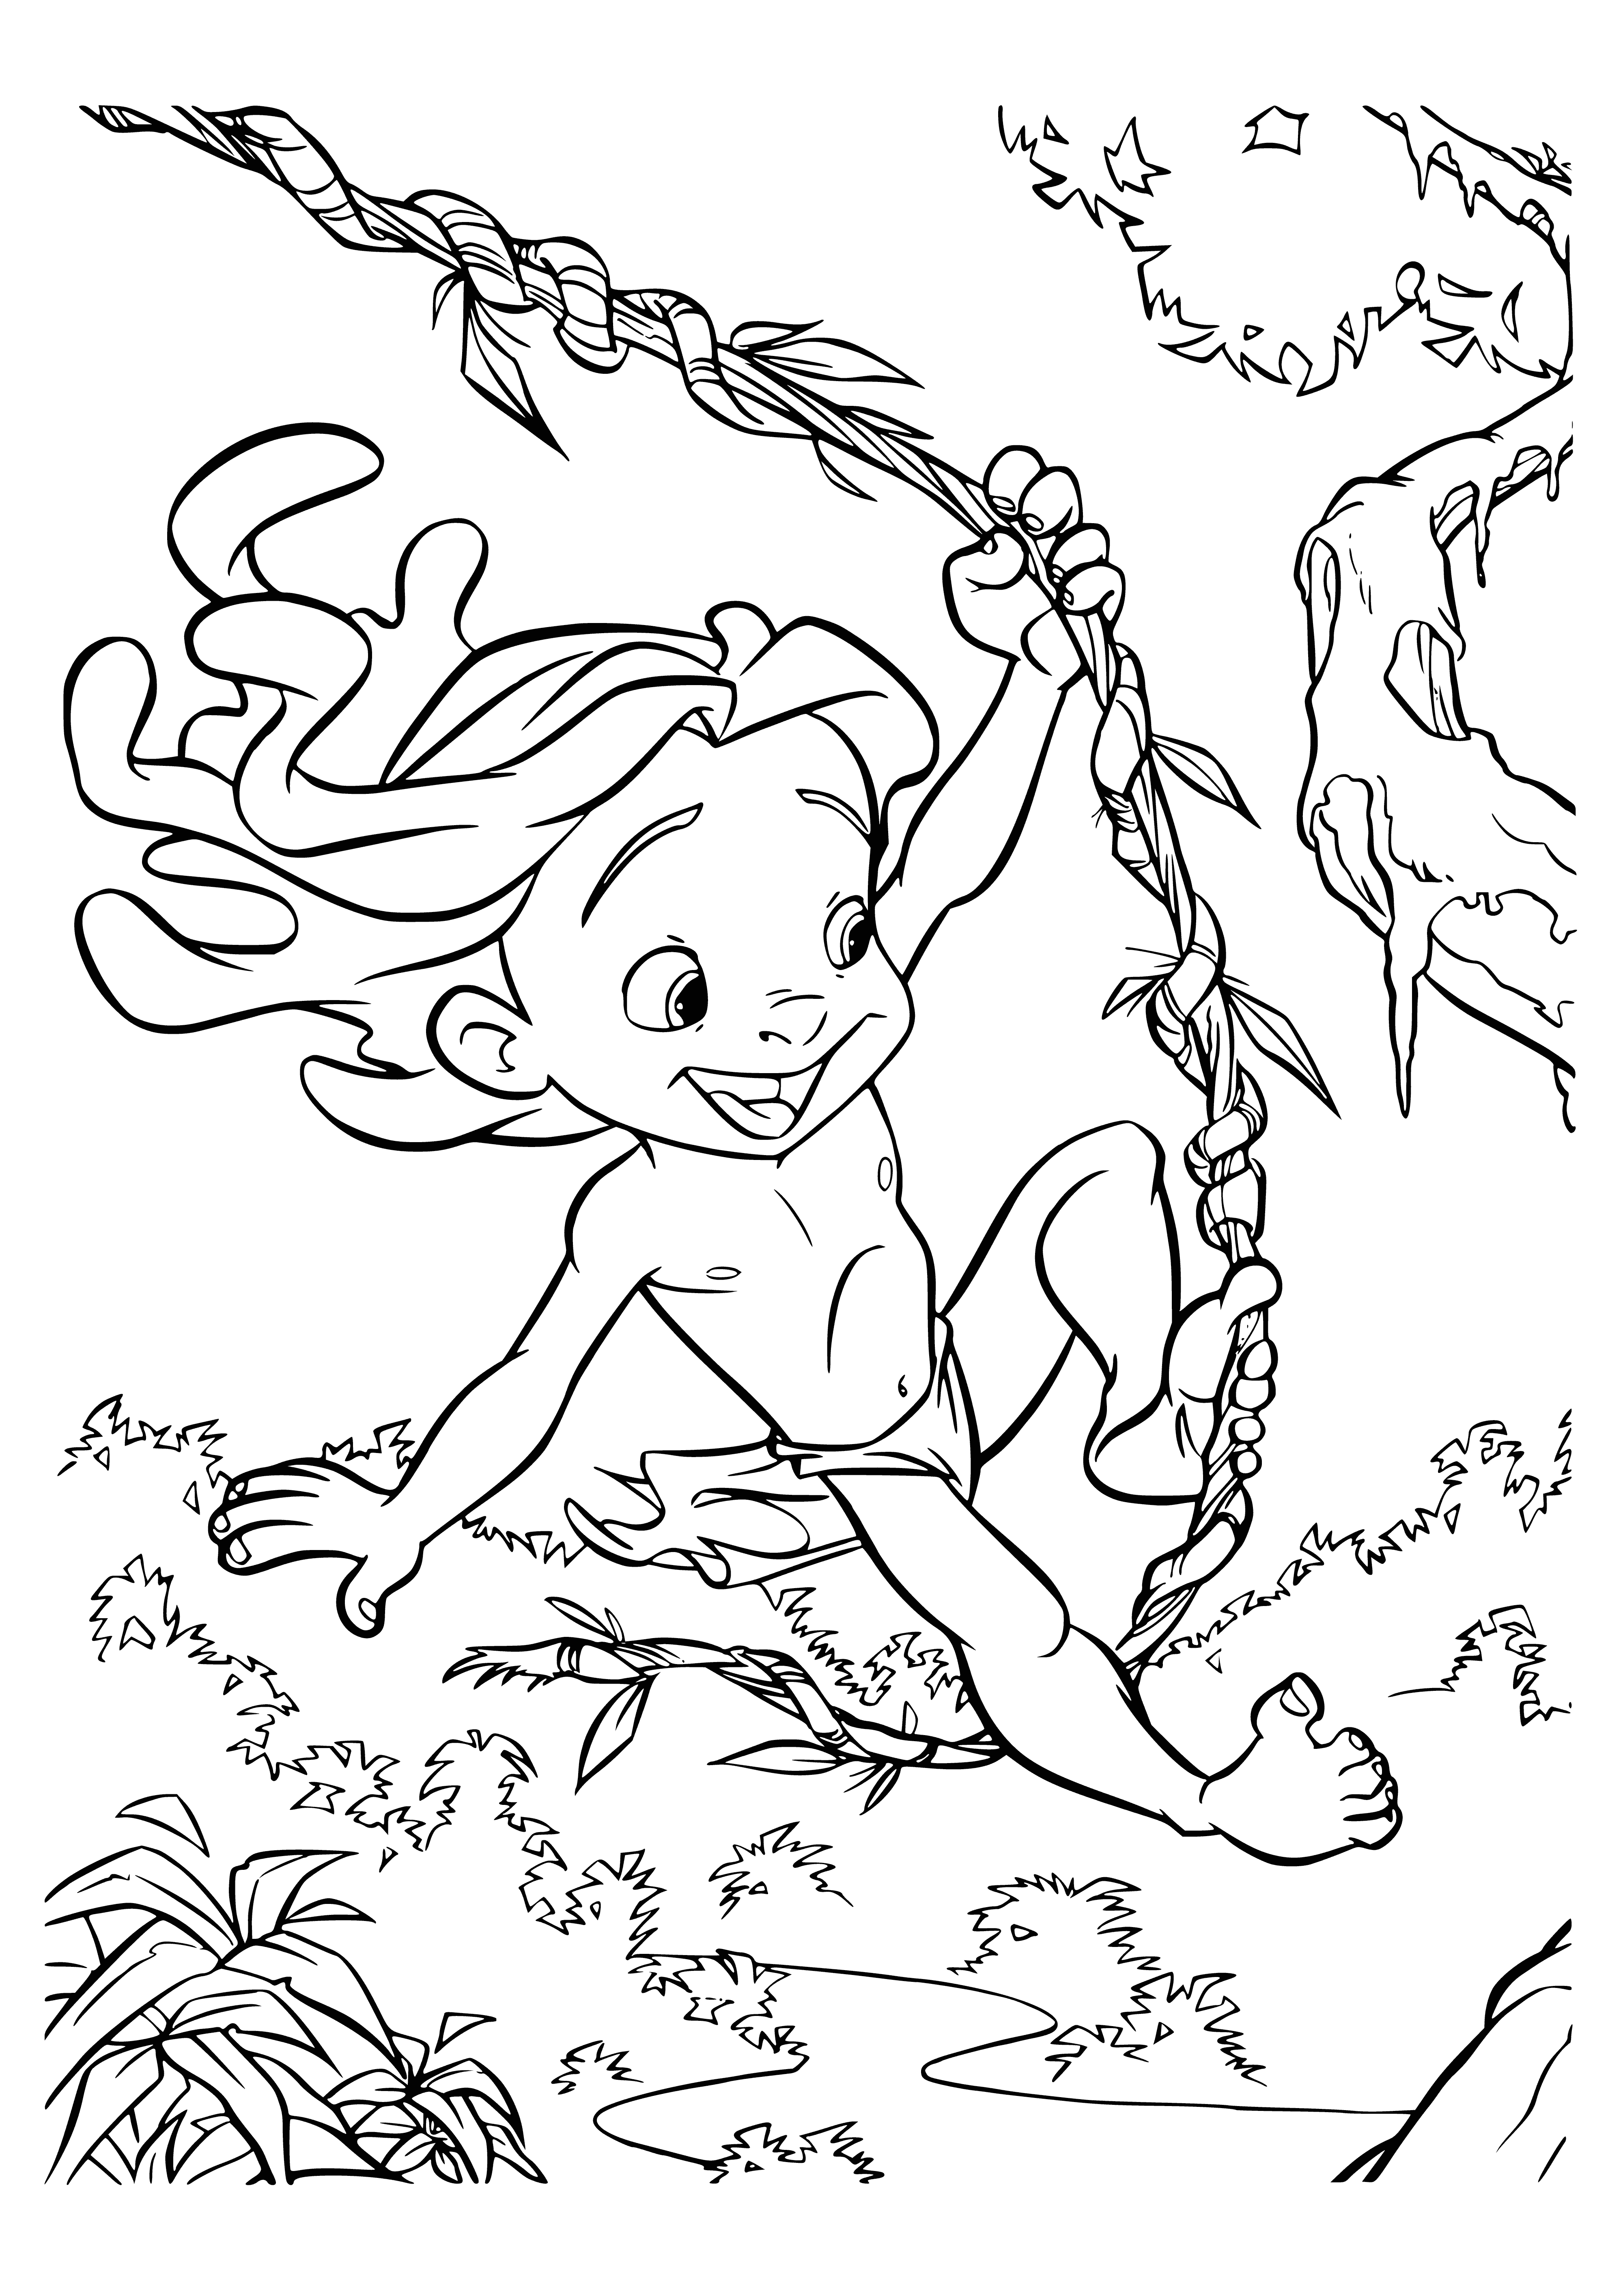 Tarzan on the vine coloring page